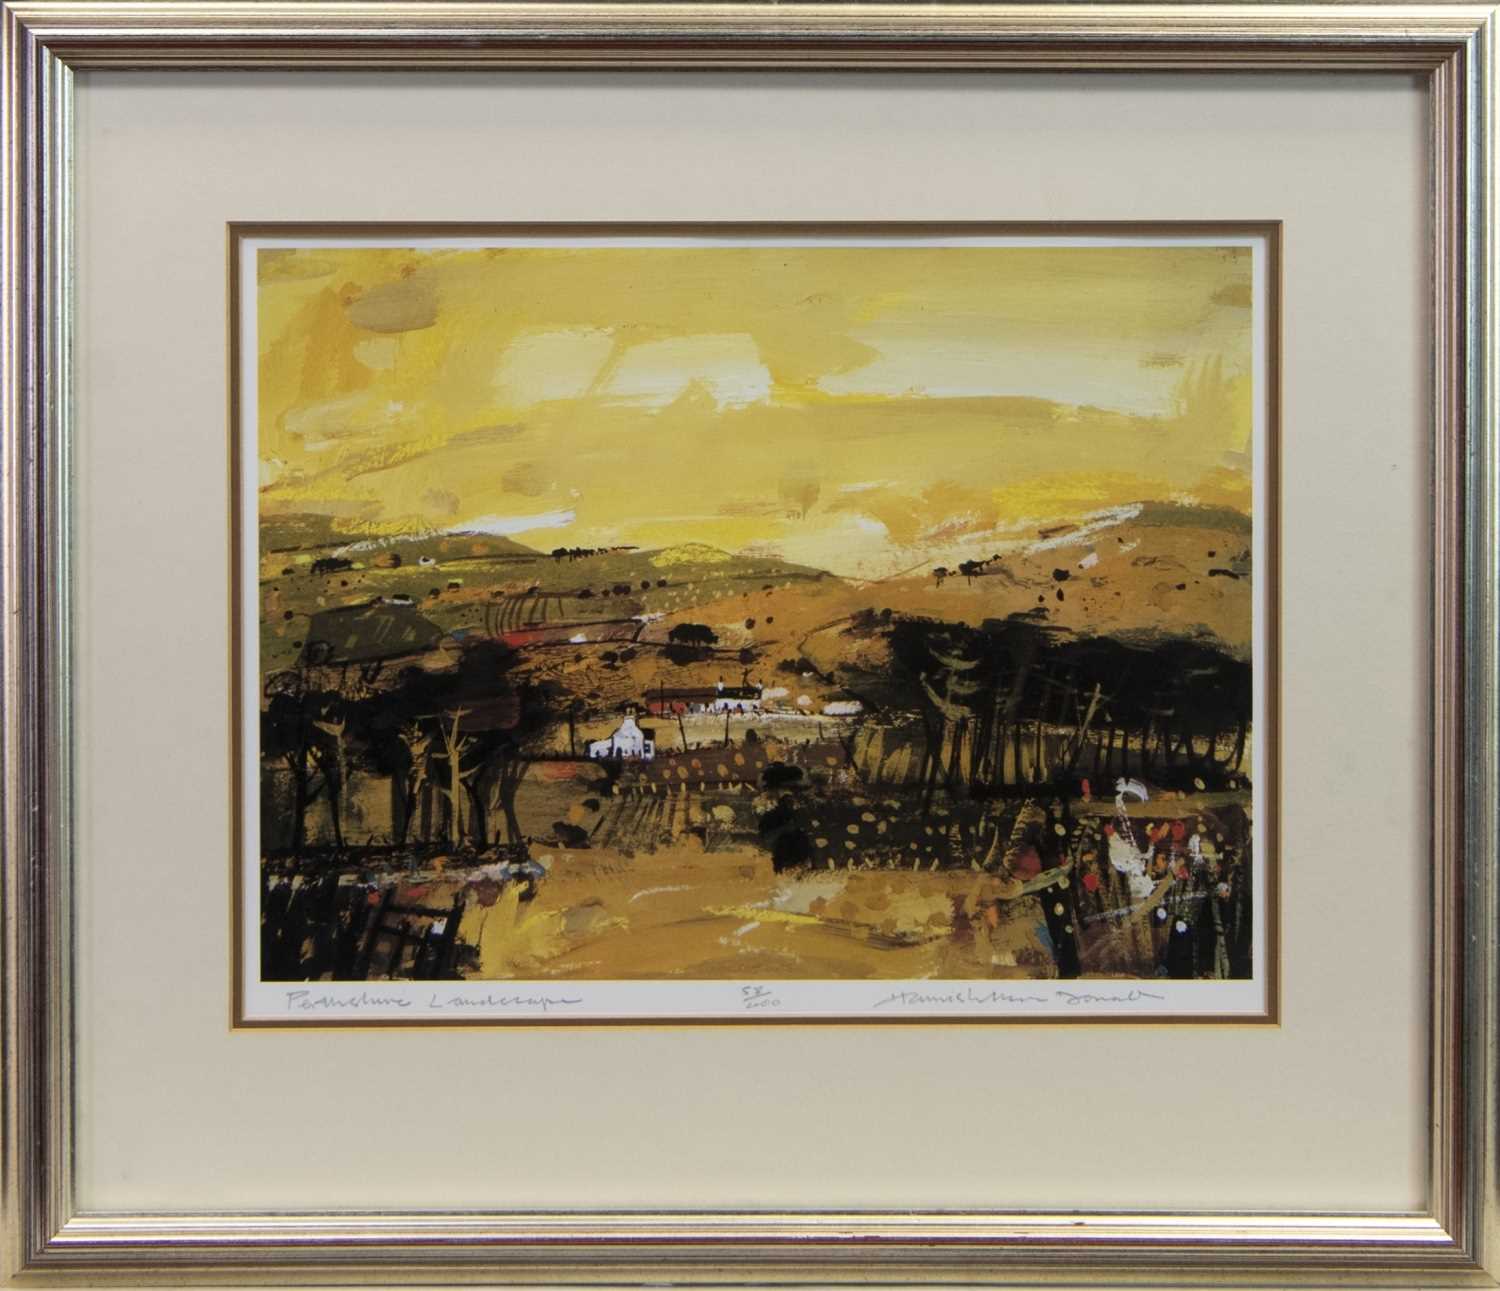 Lot 112 - PERTHSHIRE LANDSCAPE, A SIGNED LTD EDITION LITHOGRAPH BY HAMISH MACDONALD